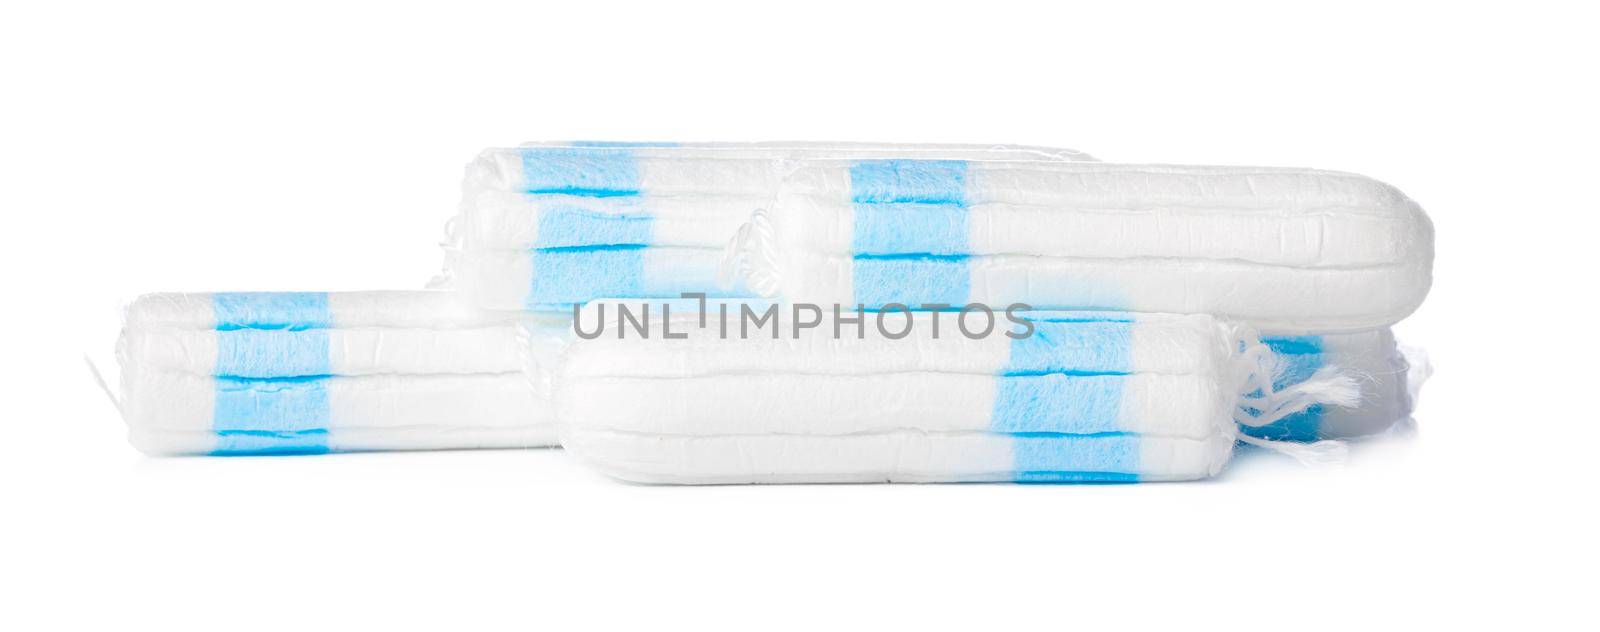 Women hygienic tampons isolated on white background by Fabrikasimf